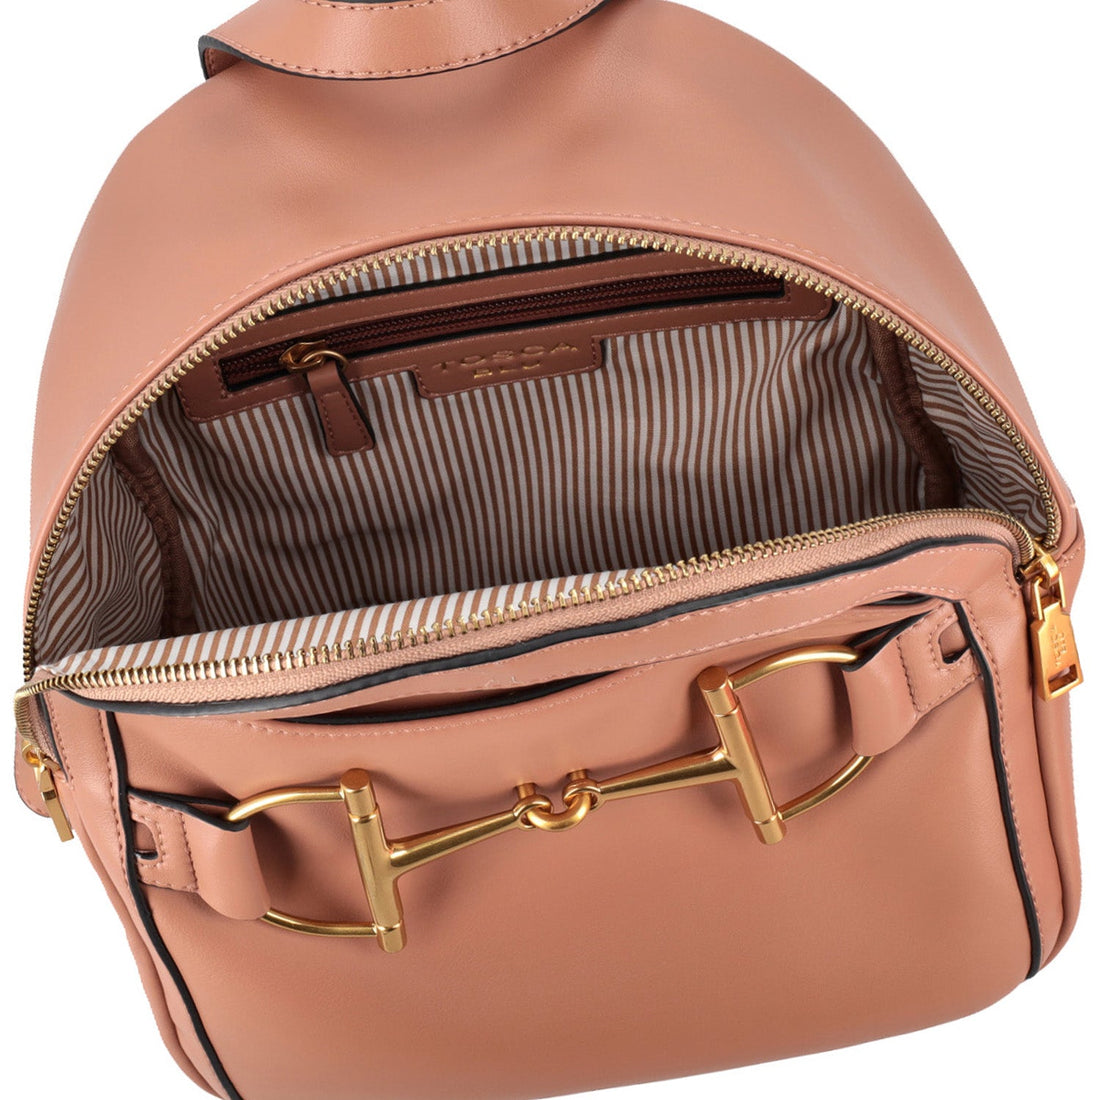 NUT TULIPANO BACKPACK WITH ZIPPER CLOSURE